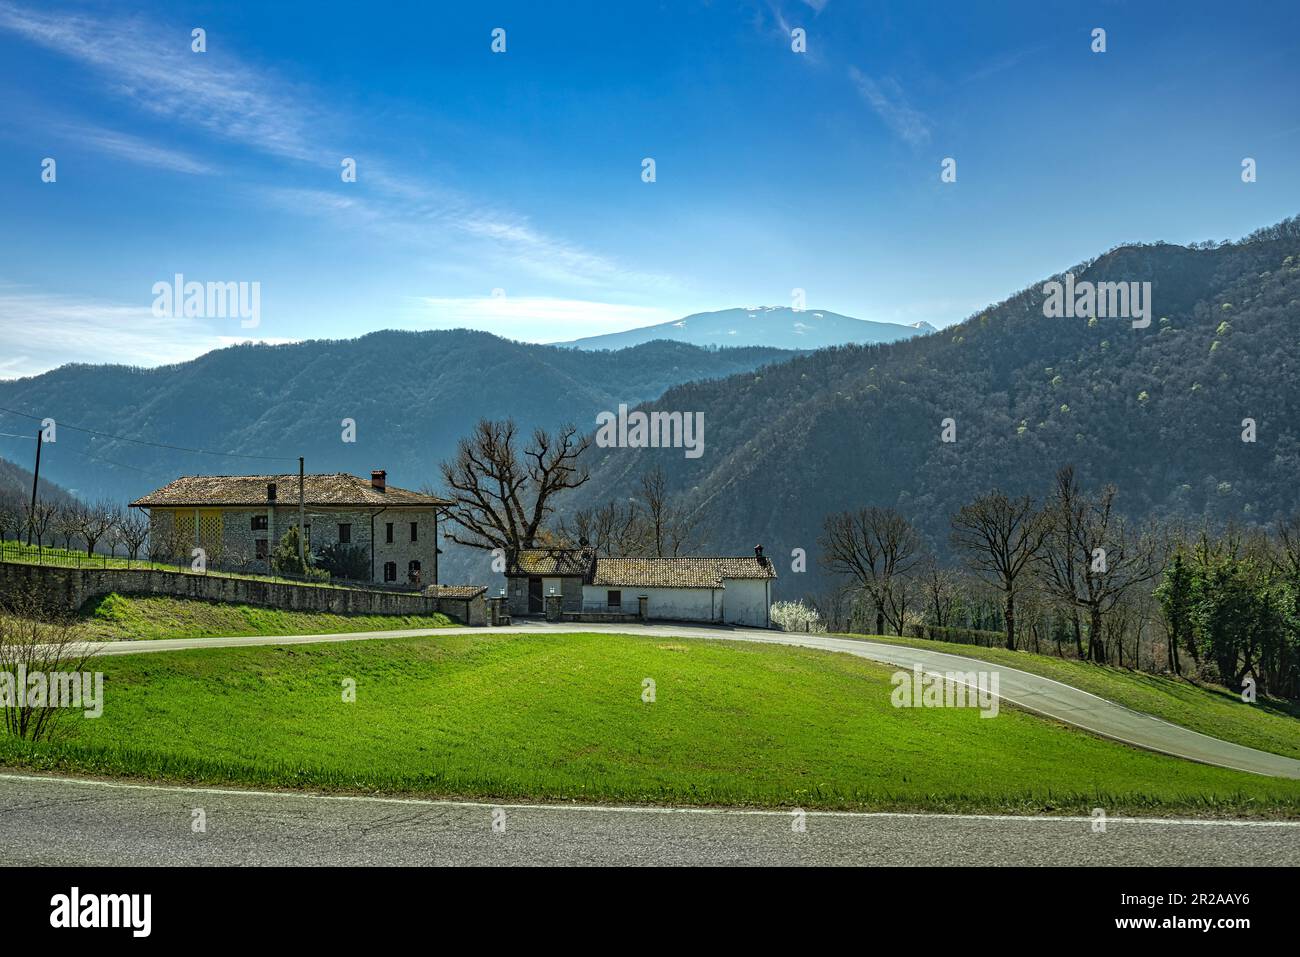 Ancient farmhouses restored on the hills of the Emilian Apennines. Emilia-Romagna, Italy, Europe Stock Photo